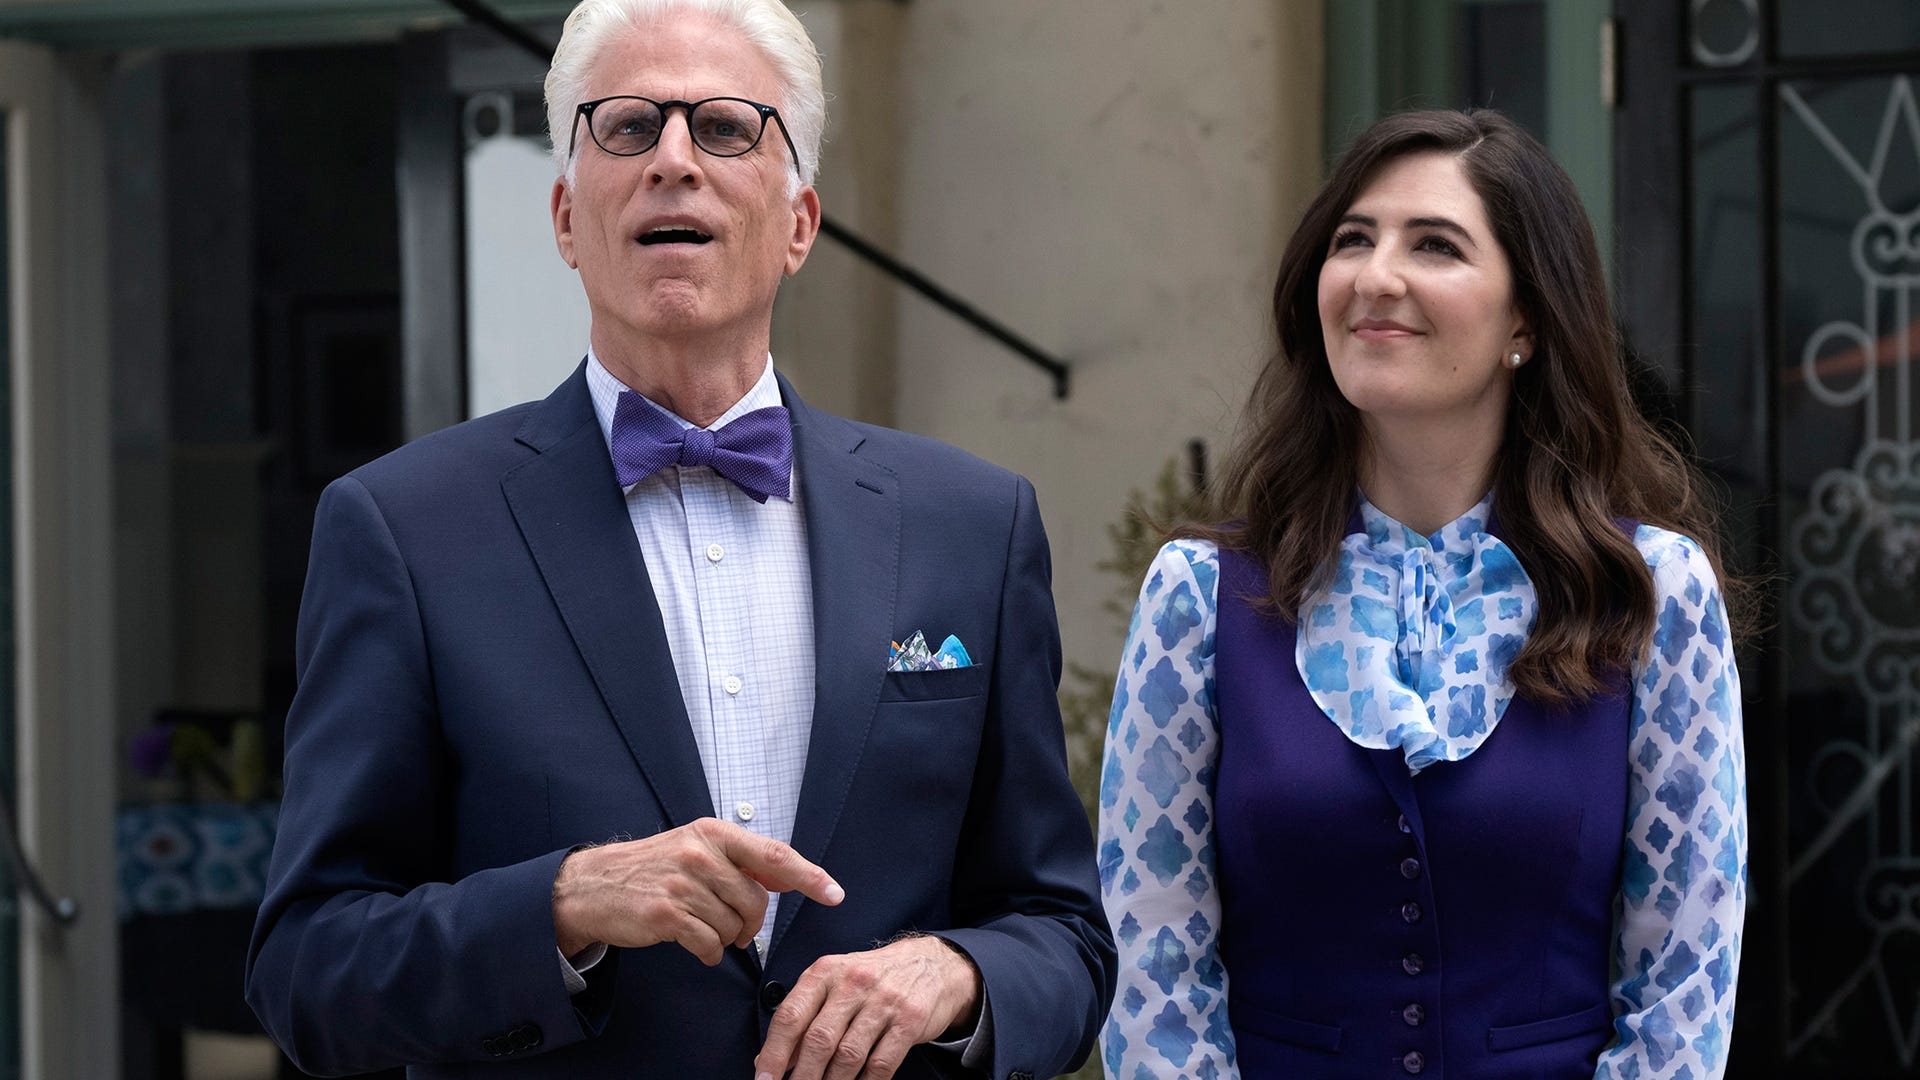 Ted Danson, D'Arcy Carden; The Good Place